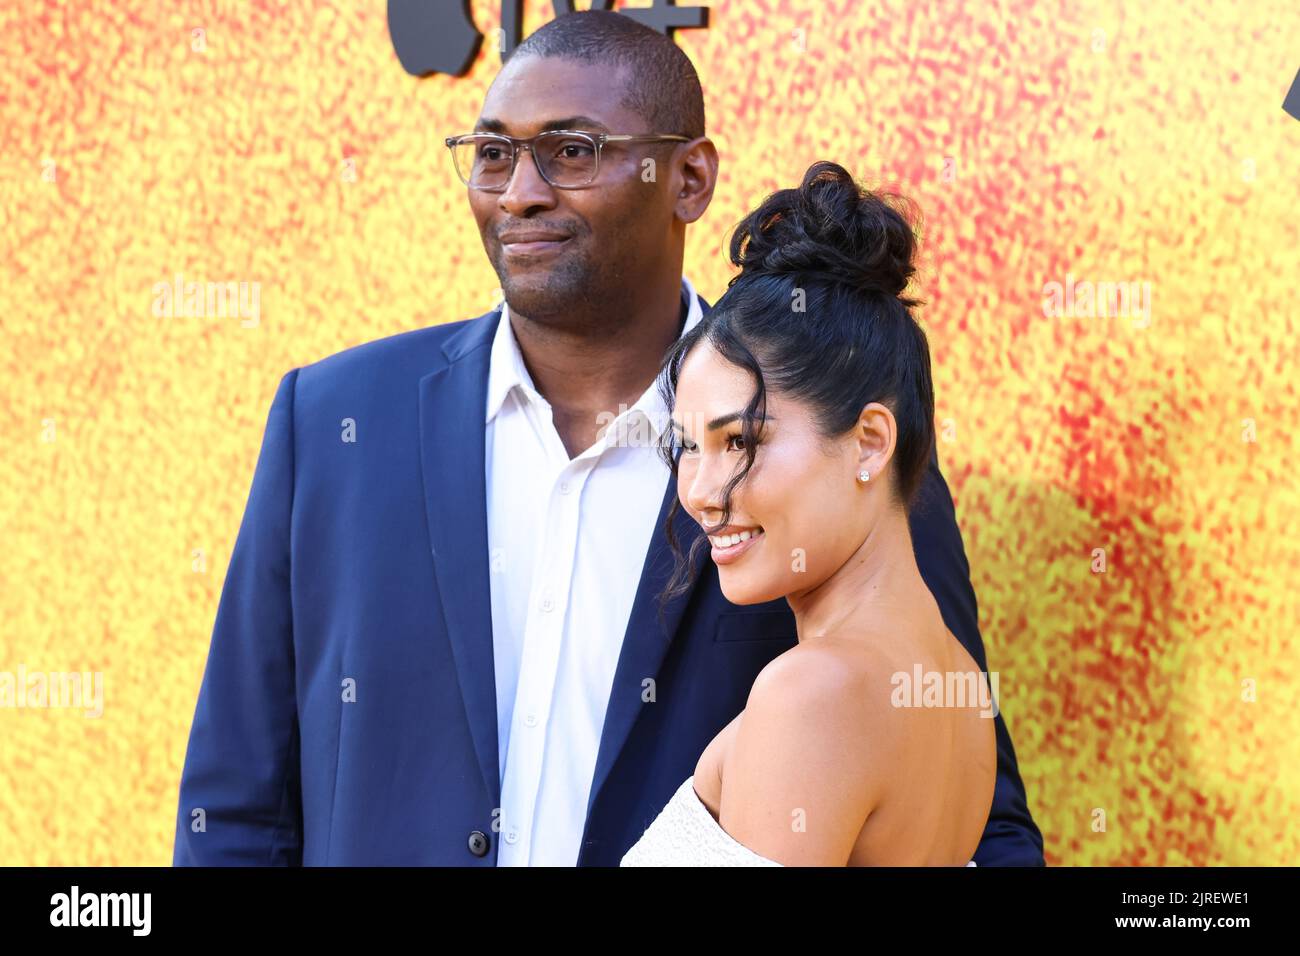 Los Angeles, United States. 23rd Aug, 2022. LOS ANGELES, CALIFORNIA, USA - AUGUST 23: American former professional basketball player Metta World Peace (Ron Artest) and wife Maya Sandiford Artest arrive at the Los Angeles Premiere Of Apple TV 's Original Series 'See' Season 3 held at Directors Guild of America (DGA) Theater Complex on August 23, 2022 in Los Angeles, California, United States. (Photo by Xavier Collin/Image Press Agency) Credit: Image Press Agency/Alamy Live News Stock Photo